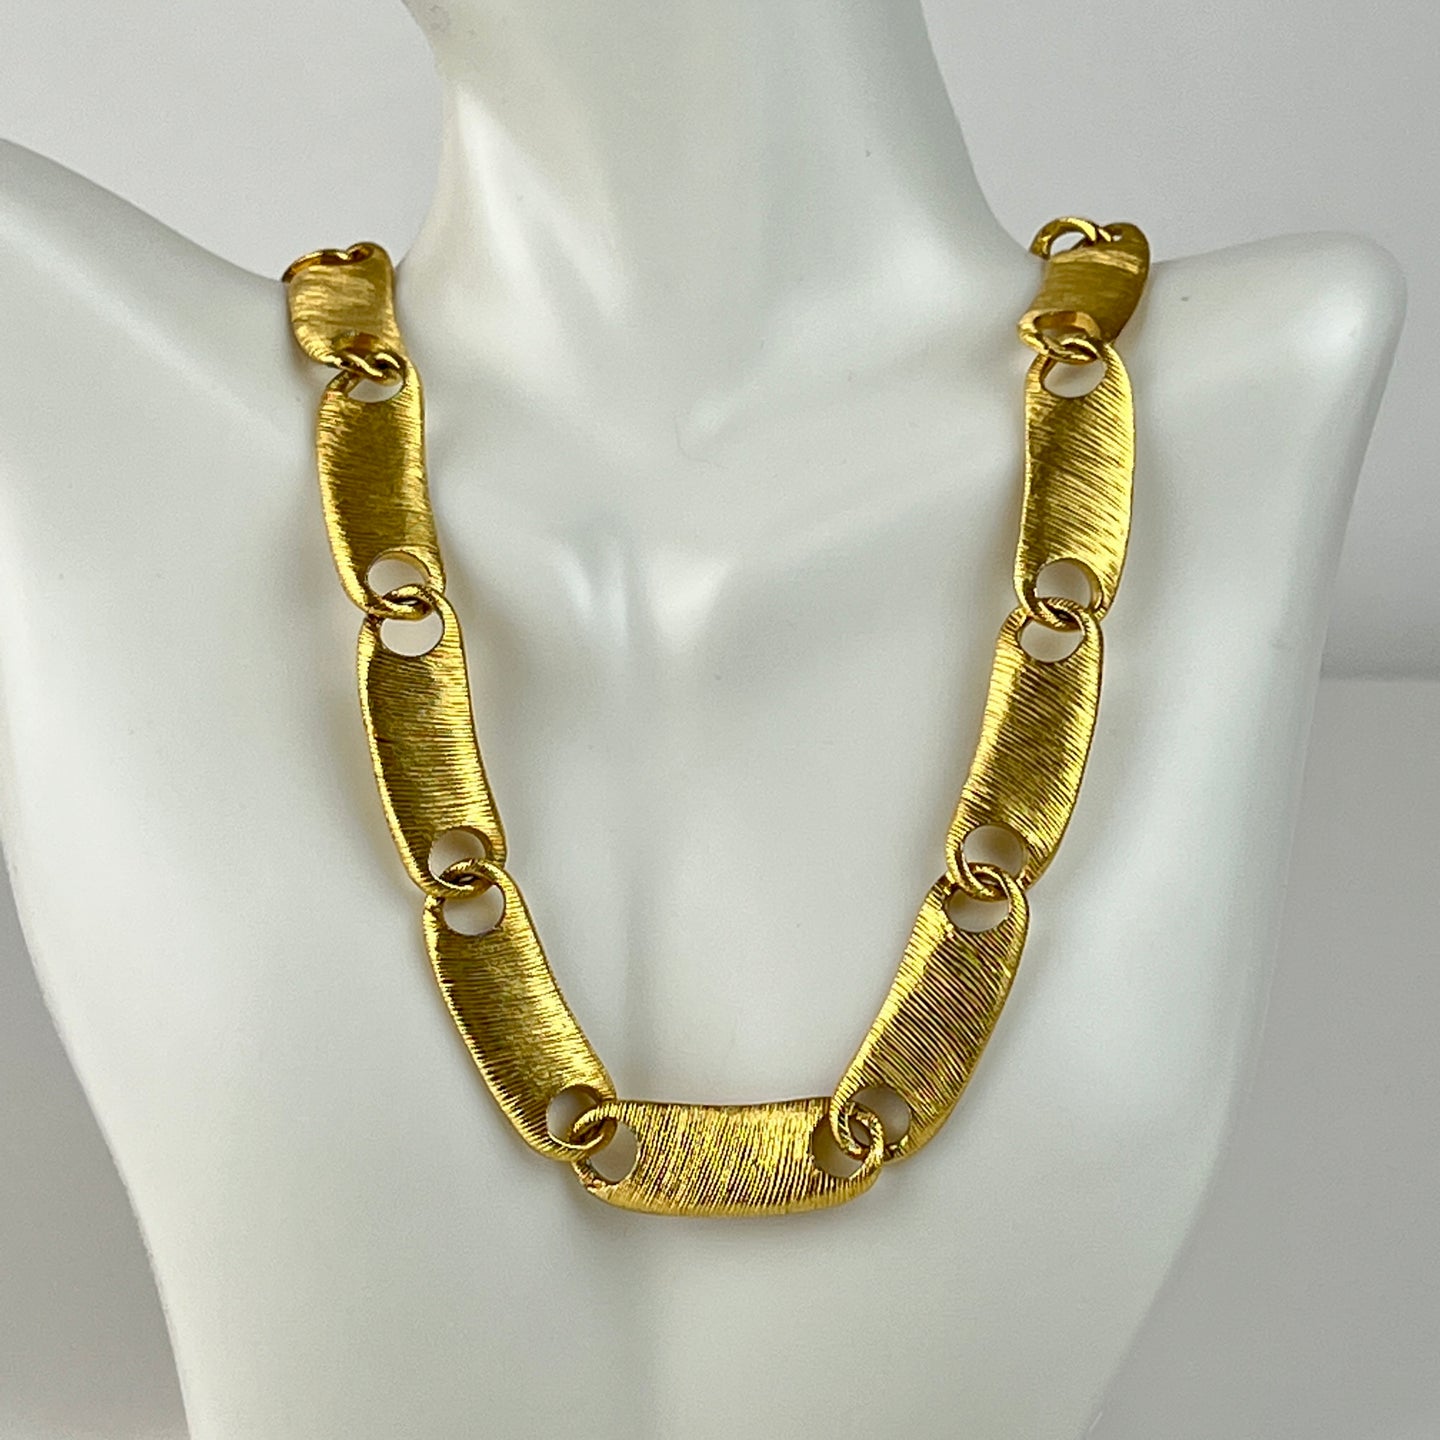 Vintage VO Gold Tone Articulated Collar Necklace 17